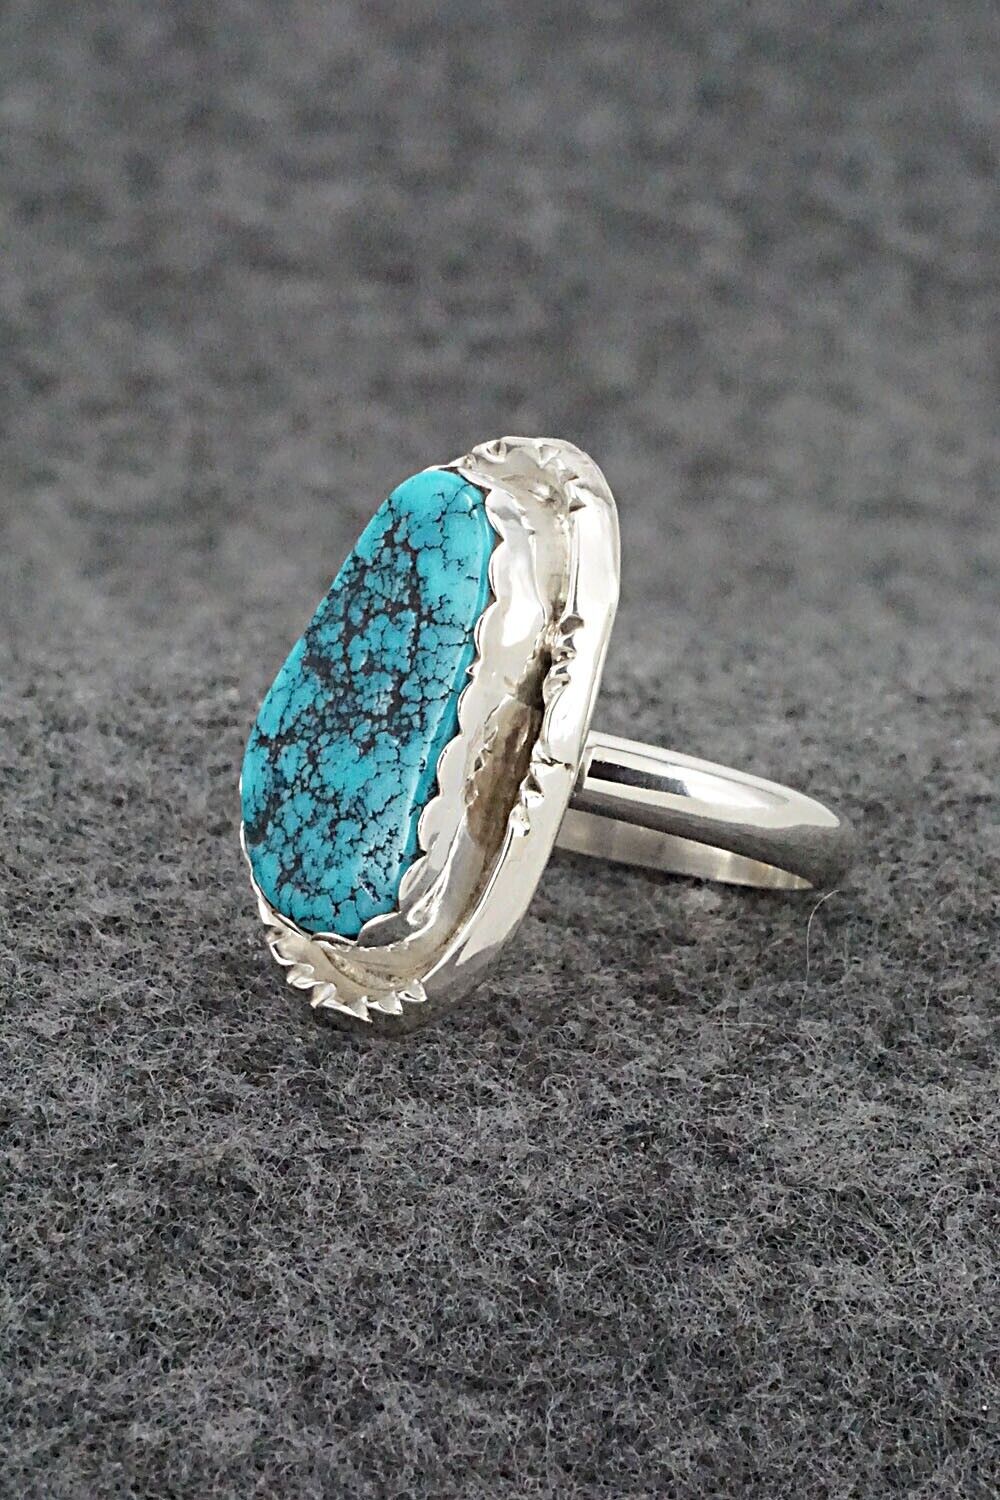 Turquoise & Sterling Silver Ring - Jeff Lucio - Size 7.25